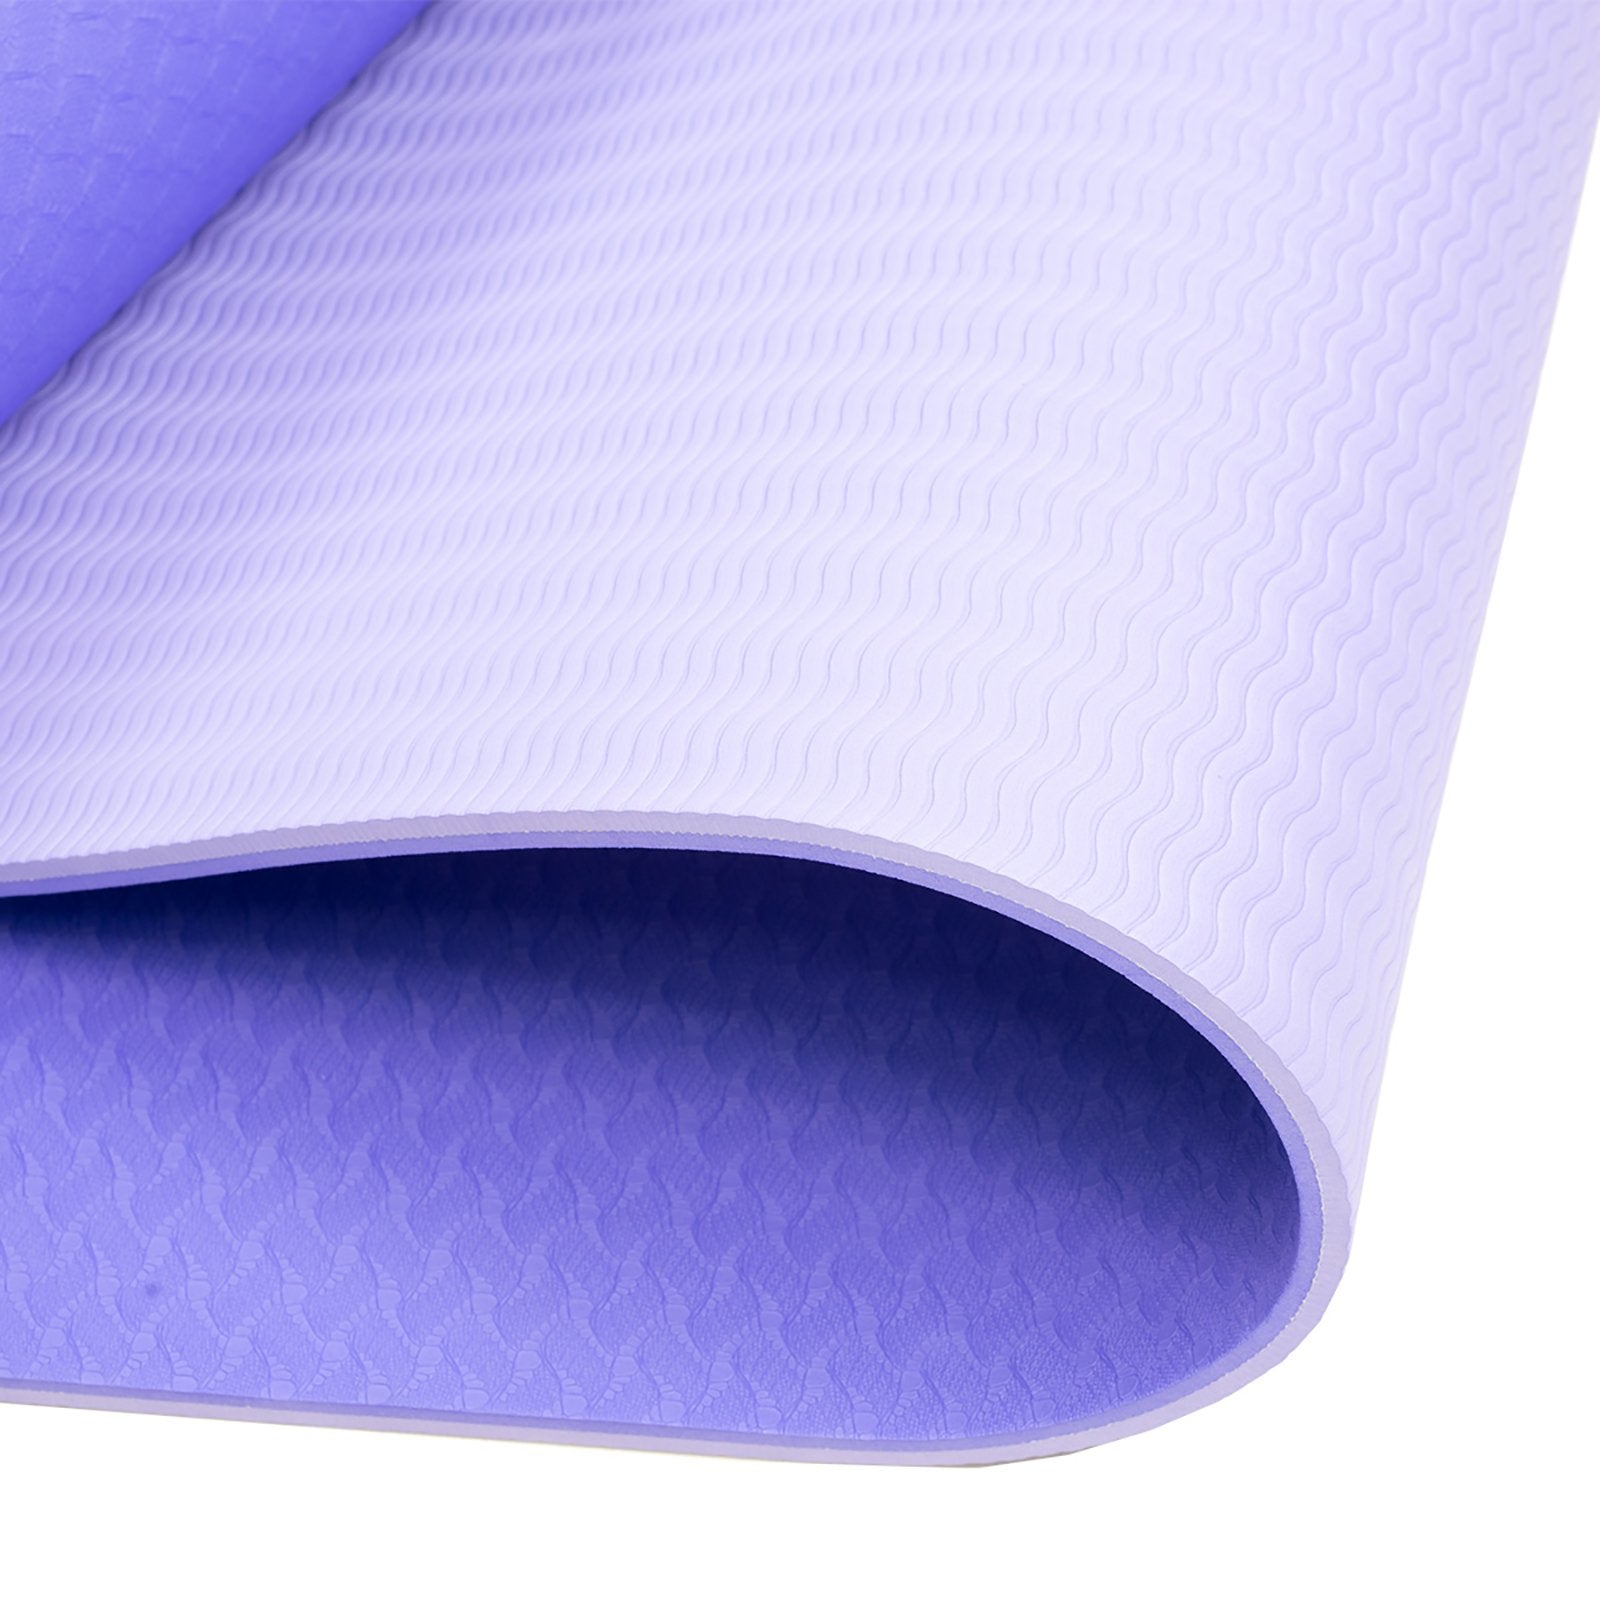 Eco-friendly Dual Layer 8mm Yoga Mat | Light Purple | Non-slip Surface And Carry Strap For Ultimate Comfort And Portability